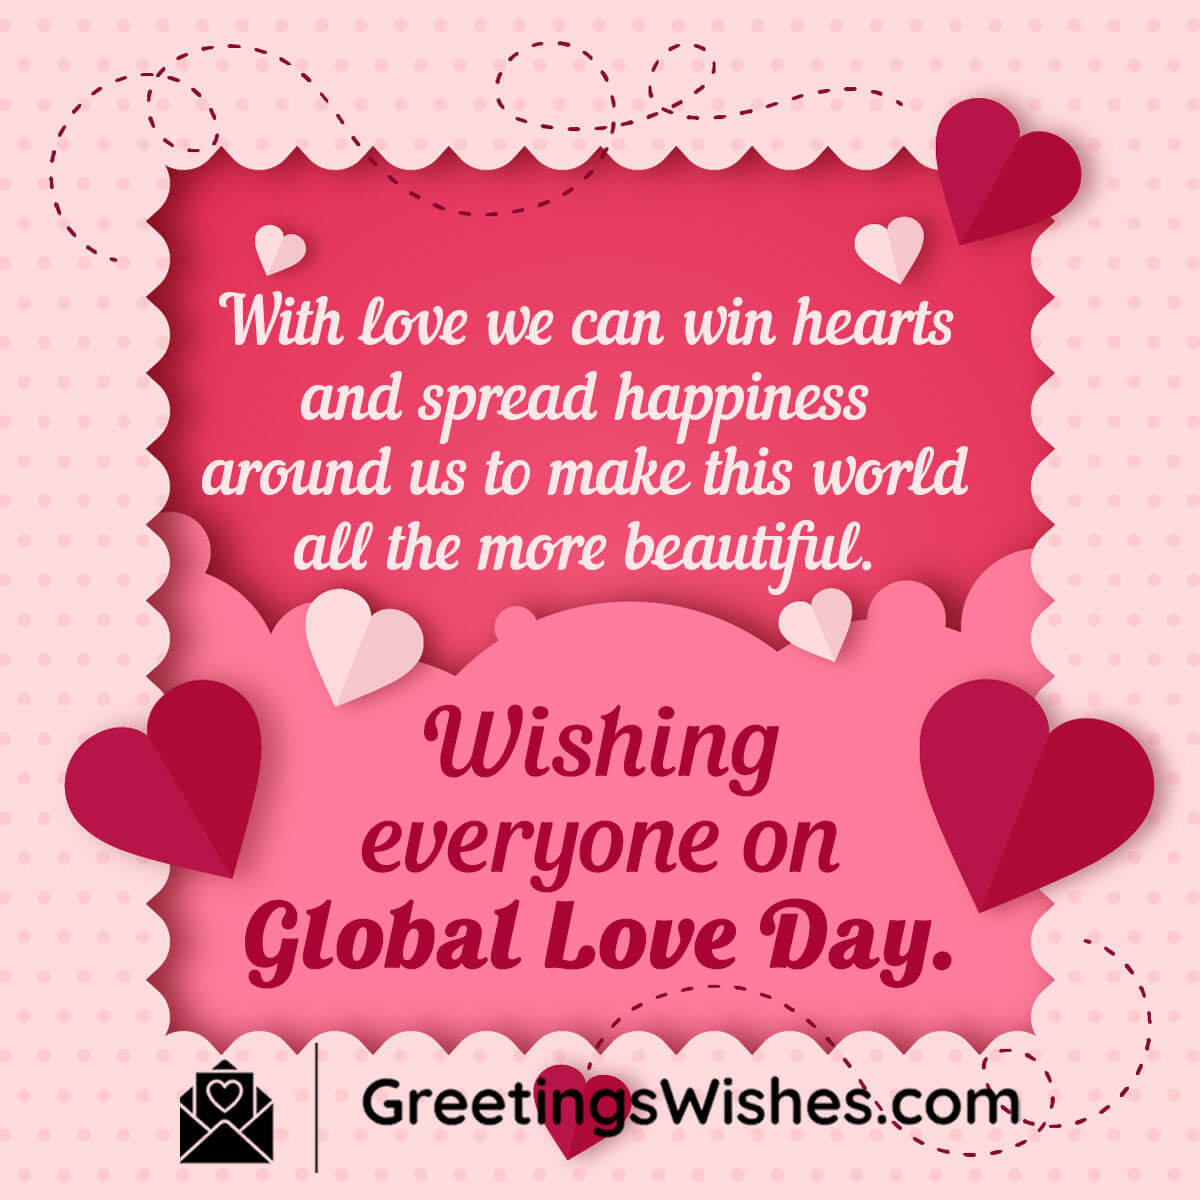 Global Love Day Wishes